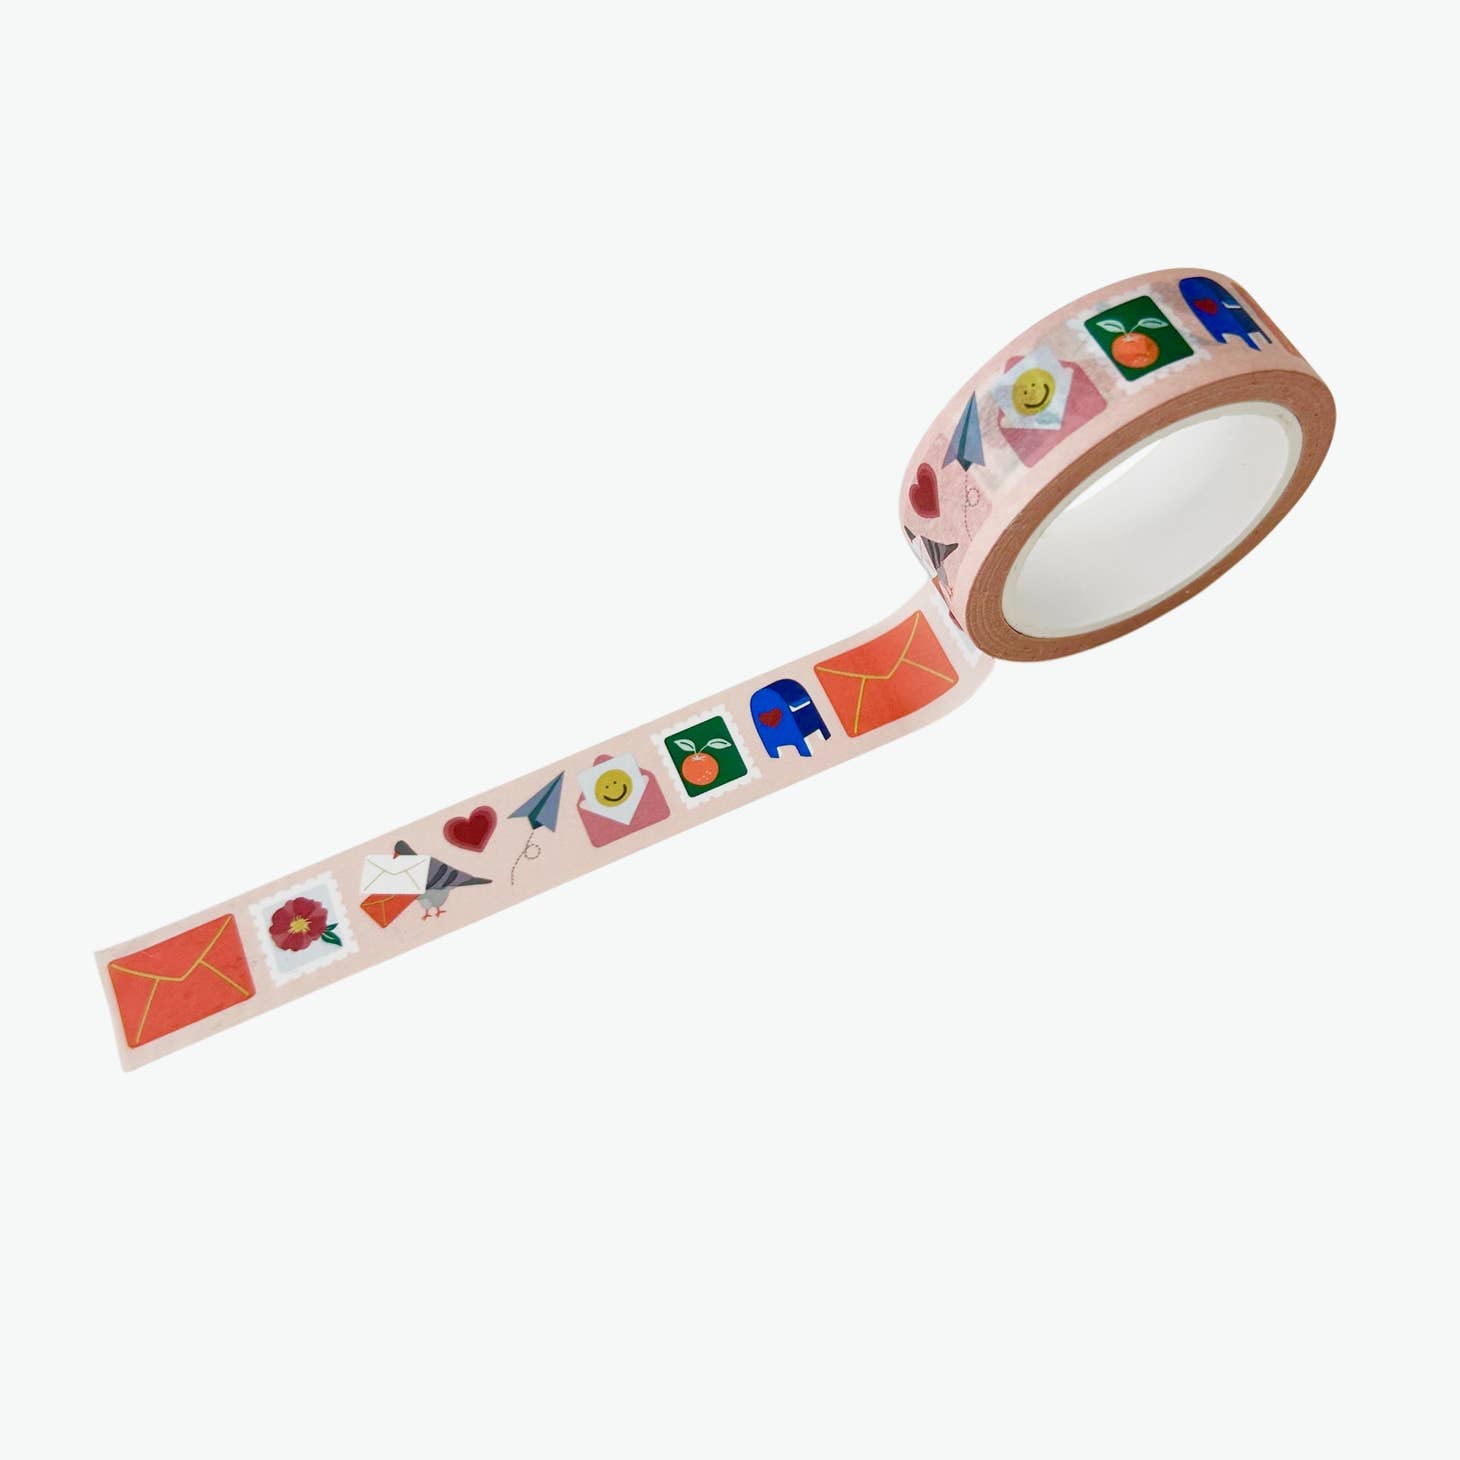 Pink decorative tape with images of blue mailbox, red mailing envelopes, paper airplanes, flower postage stamp, and pigeon holding an envelope. 